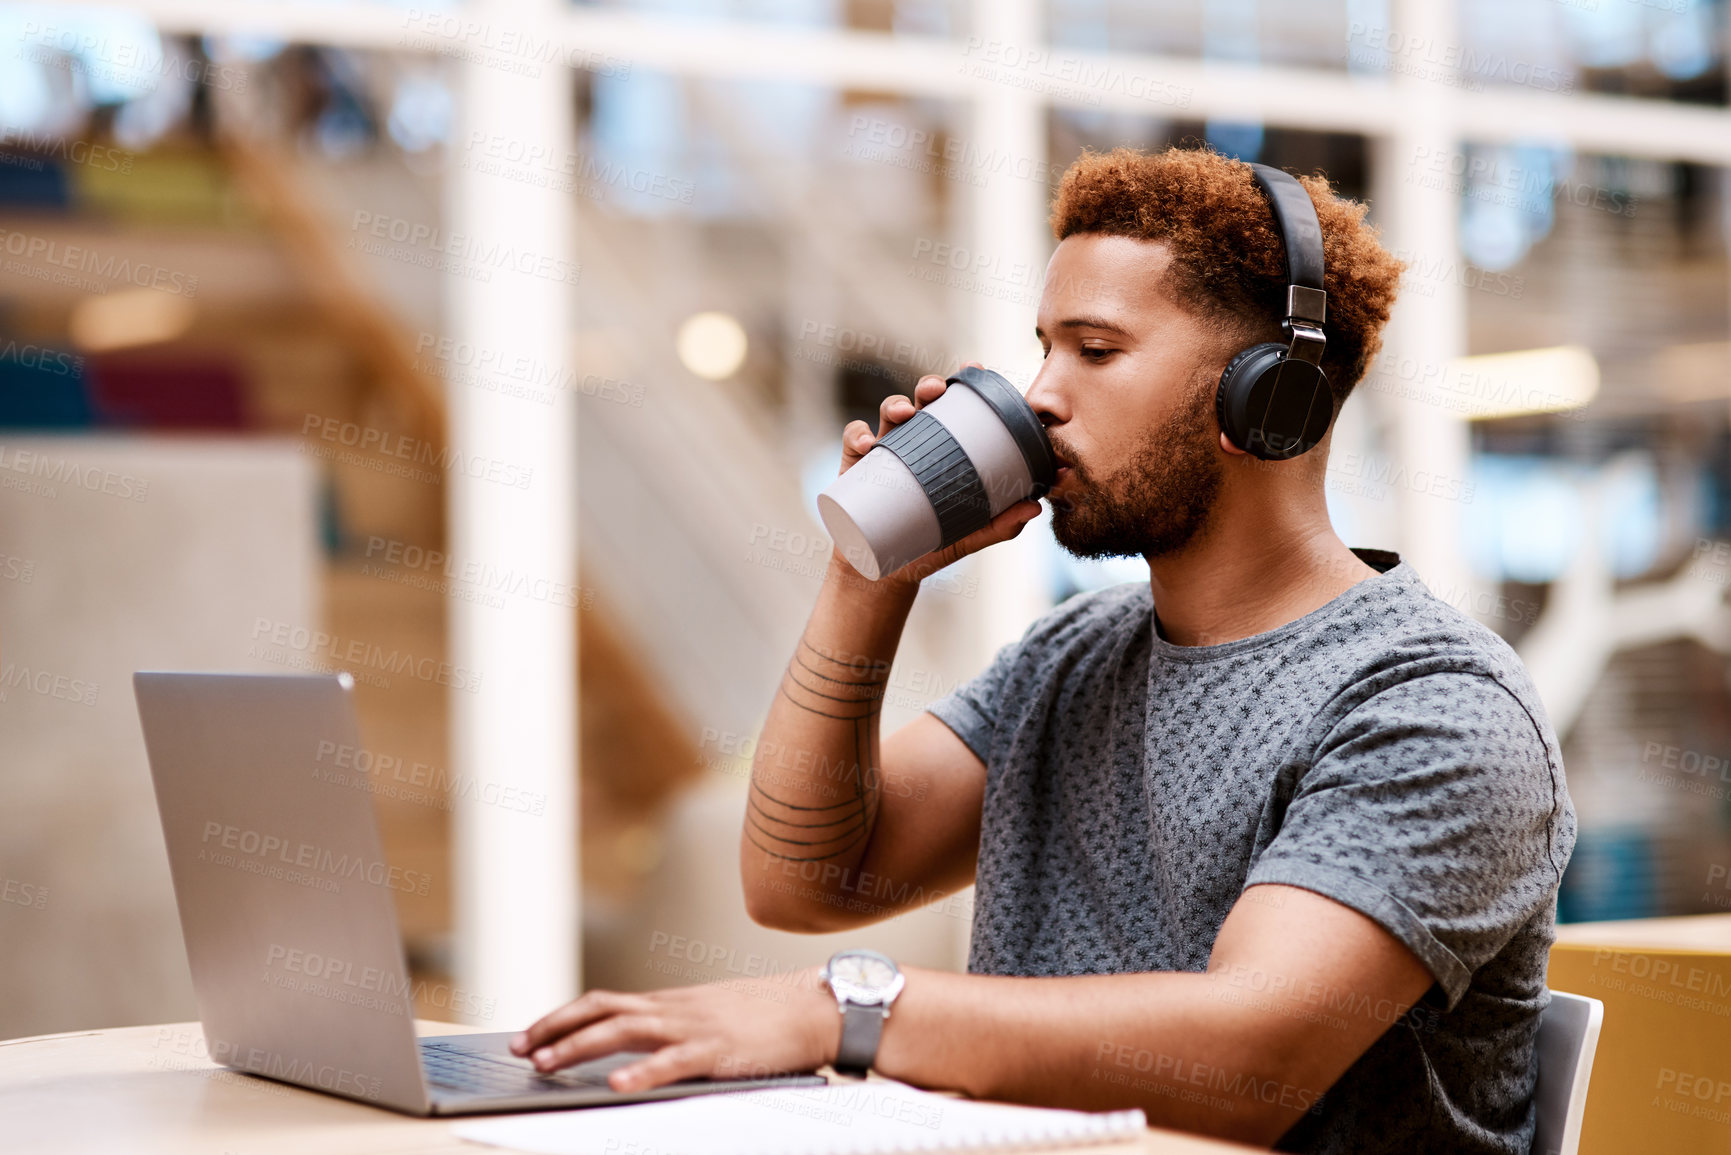 Buy stock photo Shot of a young businessman wearing headphones and drinking coffee while working on a laptop in an office